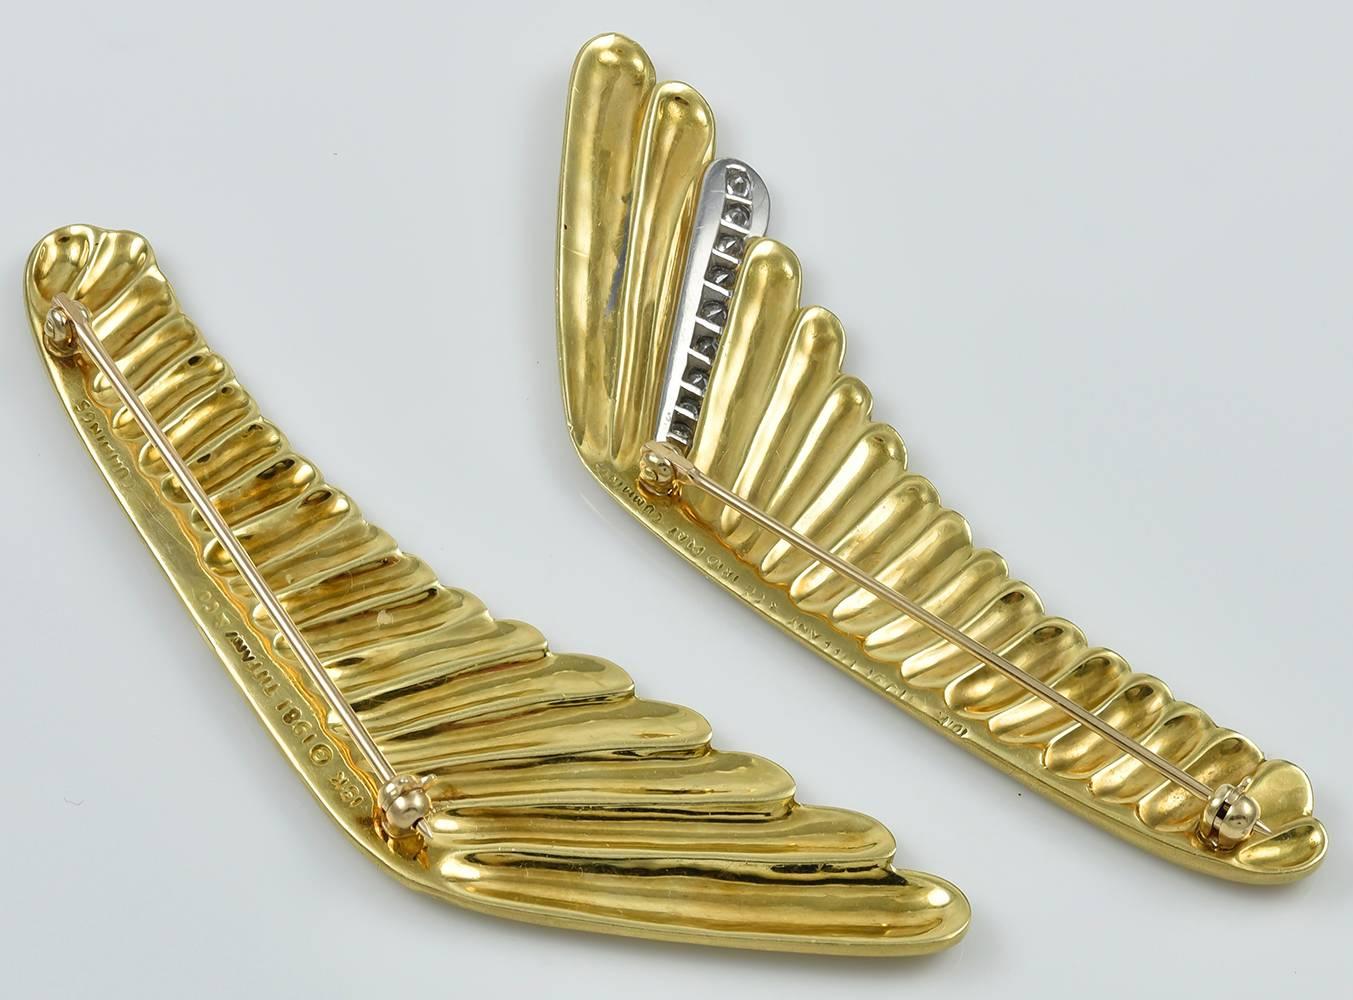 Two matte-finish yellow gold wing pins, worn together to great effect, one with diamond feather accent mounted in platinum for contrast, signed TIFFANY & CO CUMMINGS 18K IRID PLAT design copyrighted 1981, long single hinged pin backs with safety